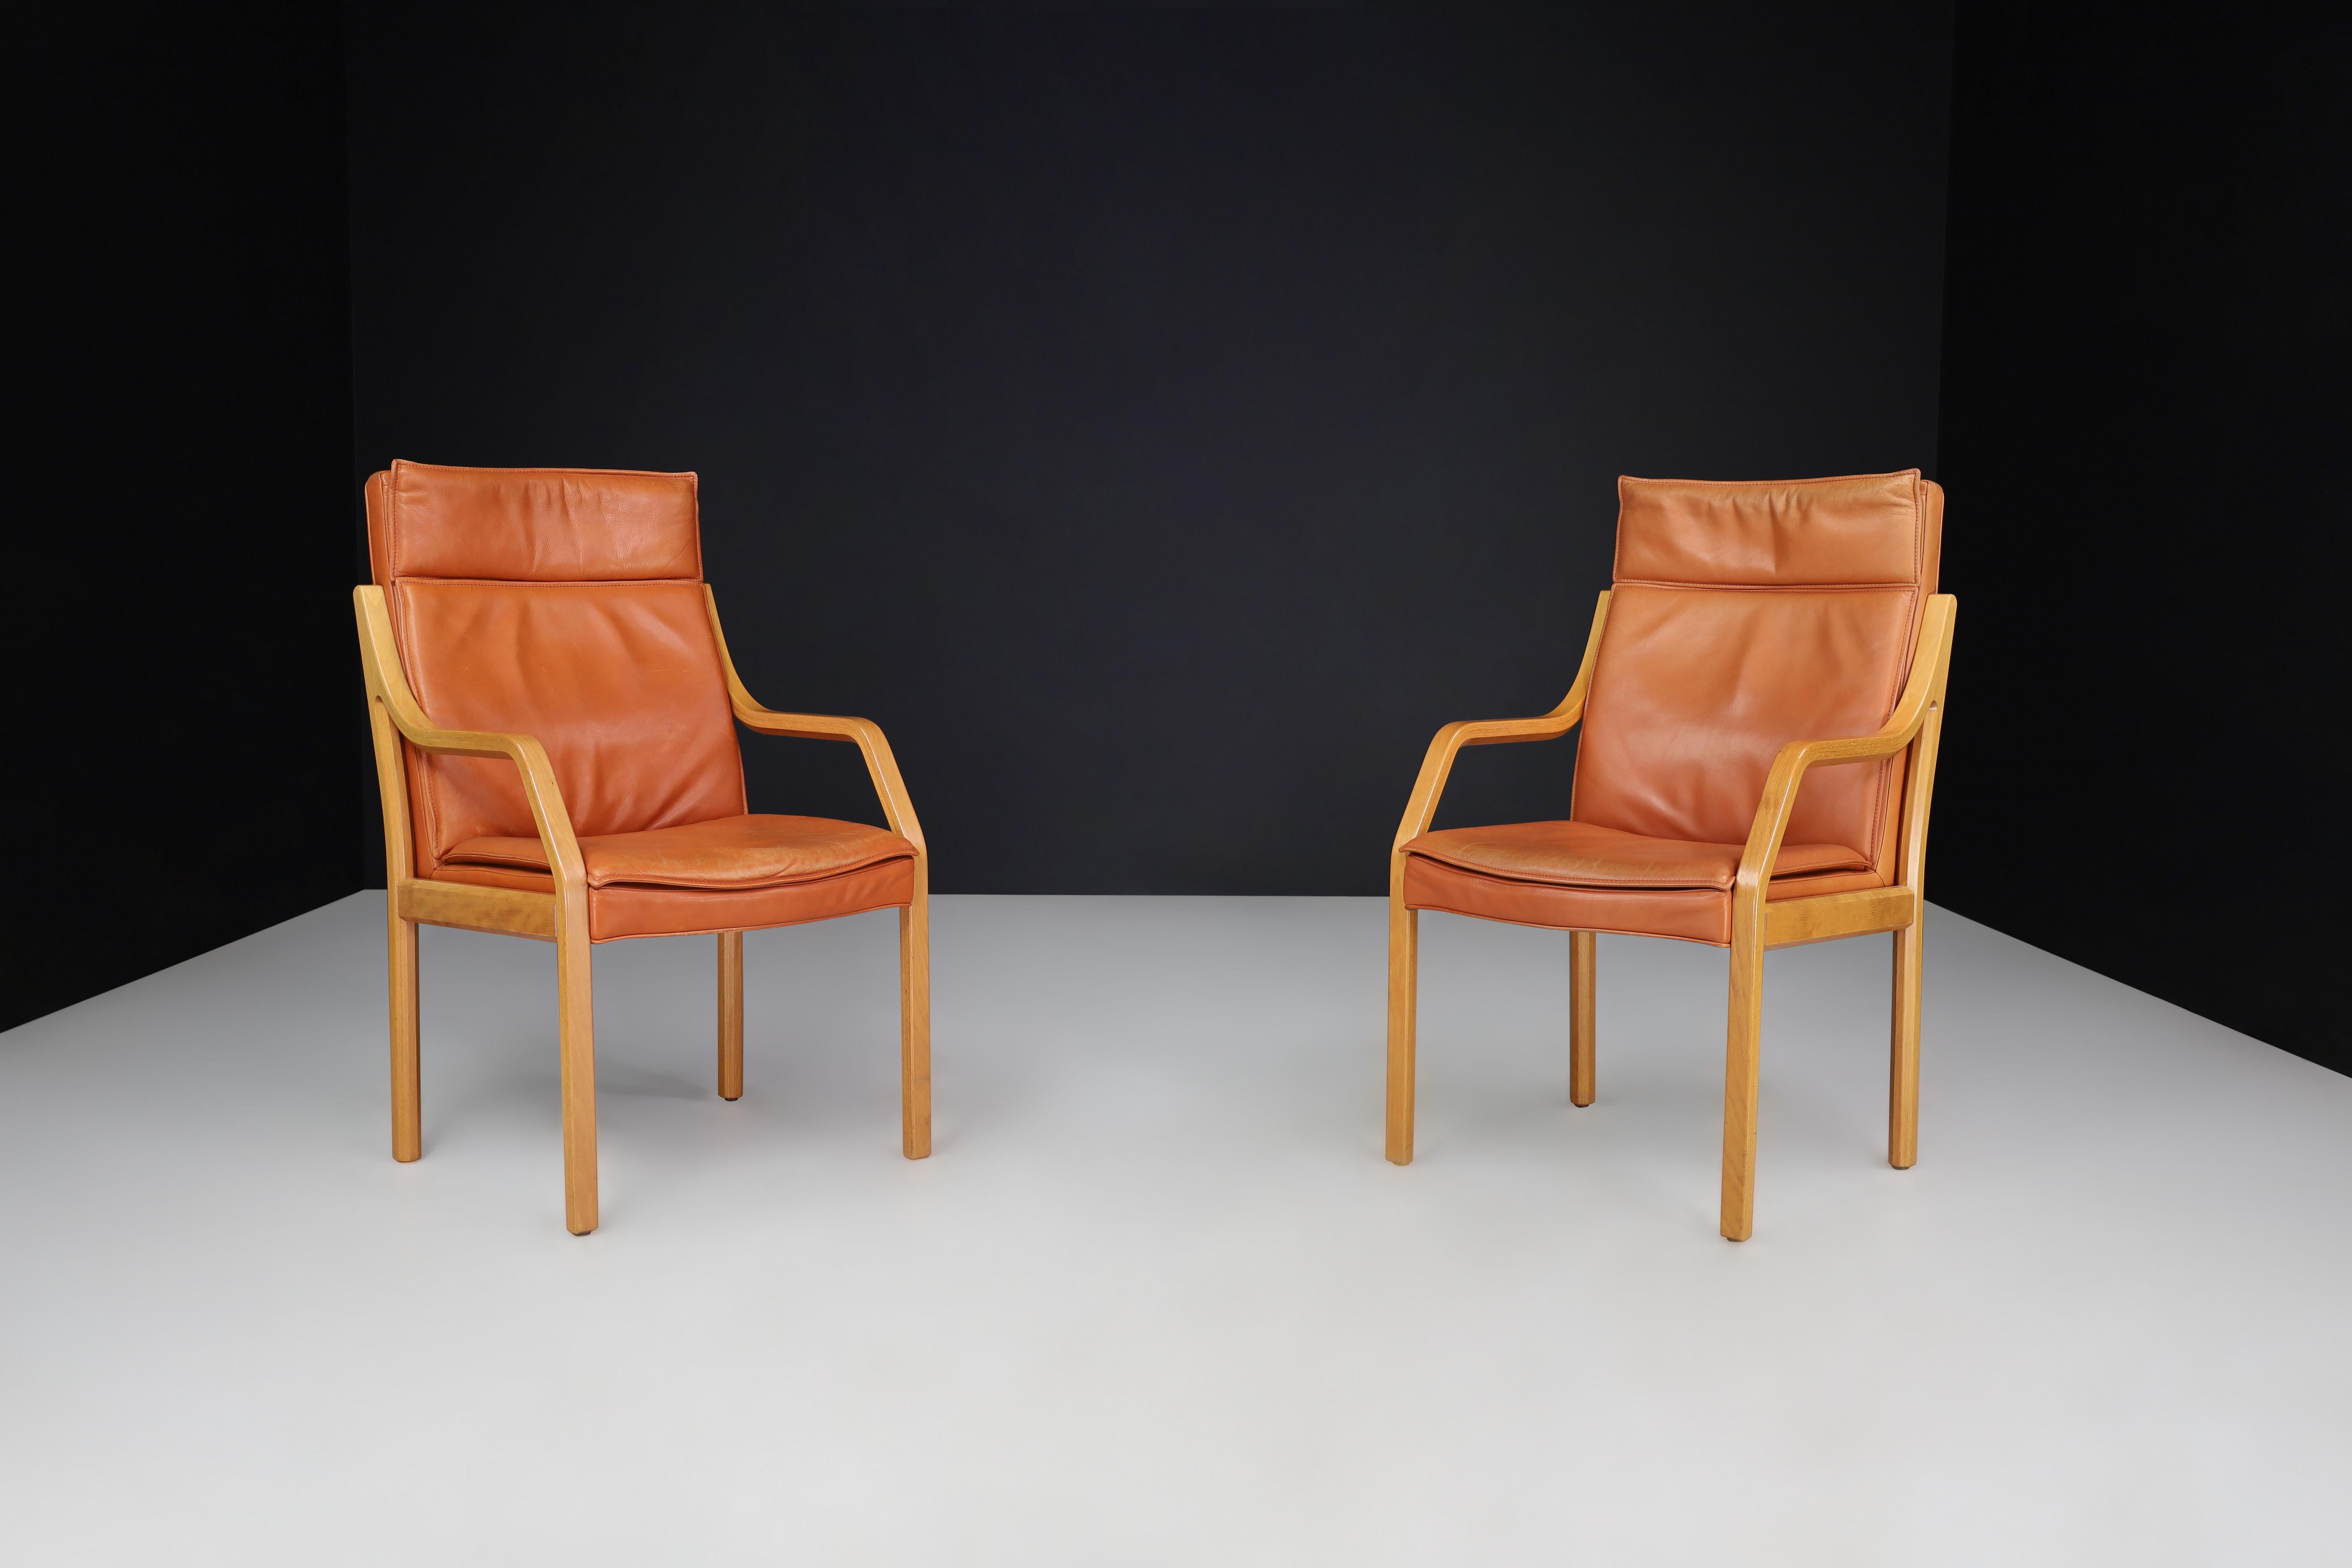 Walter Knoll Set of 16 Dining Room Chairs in Bentwood and Leather, Germany 1970s For Sale 5